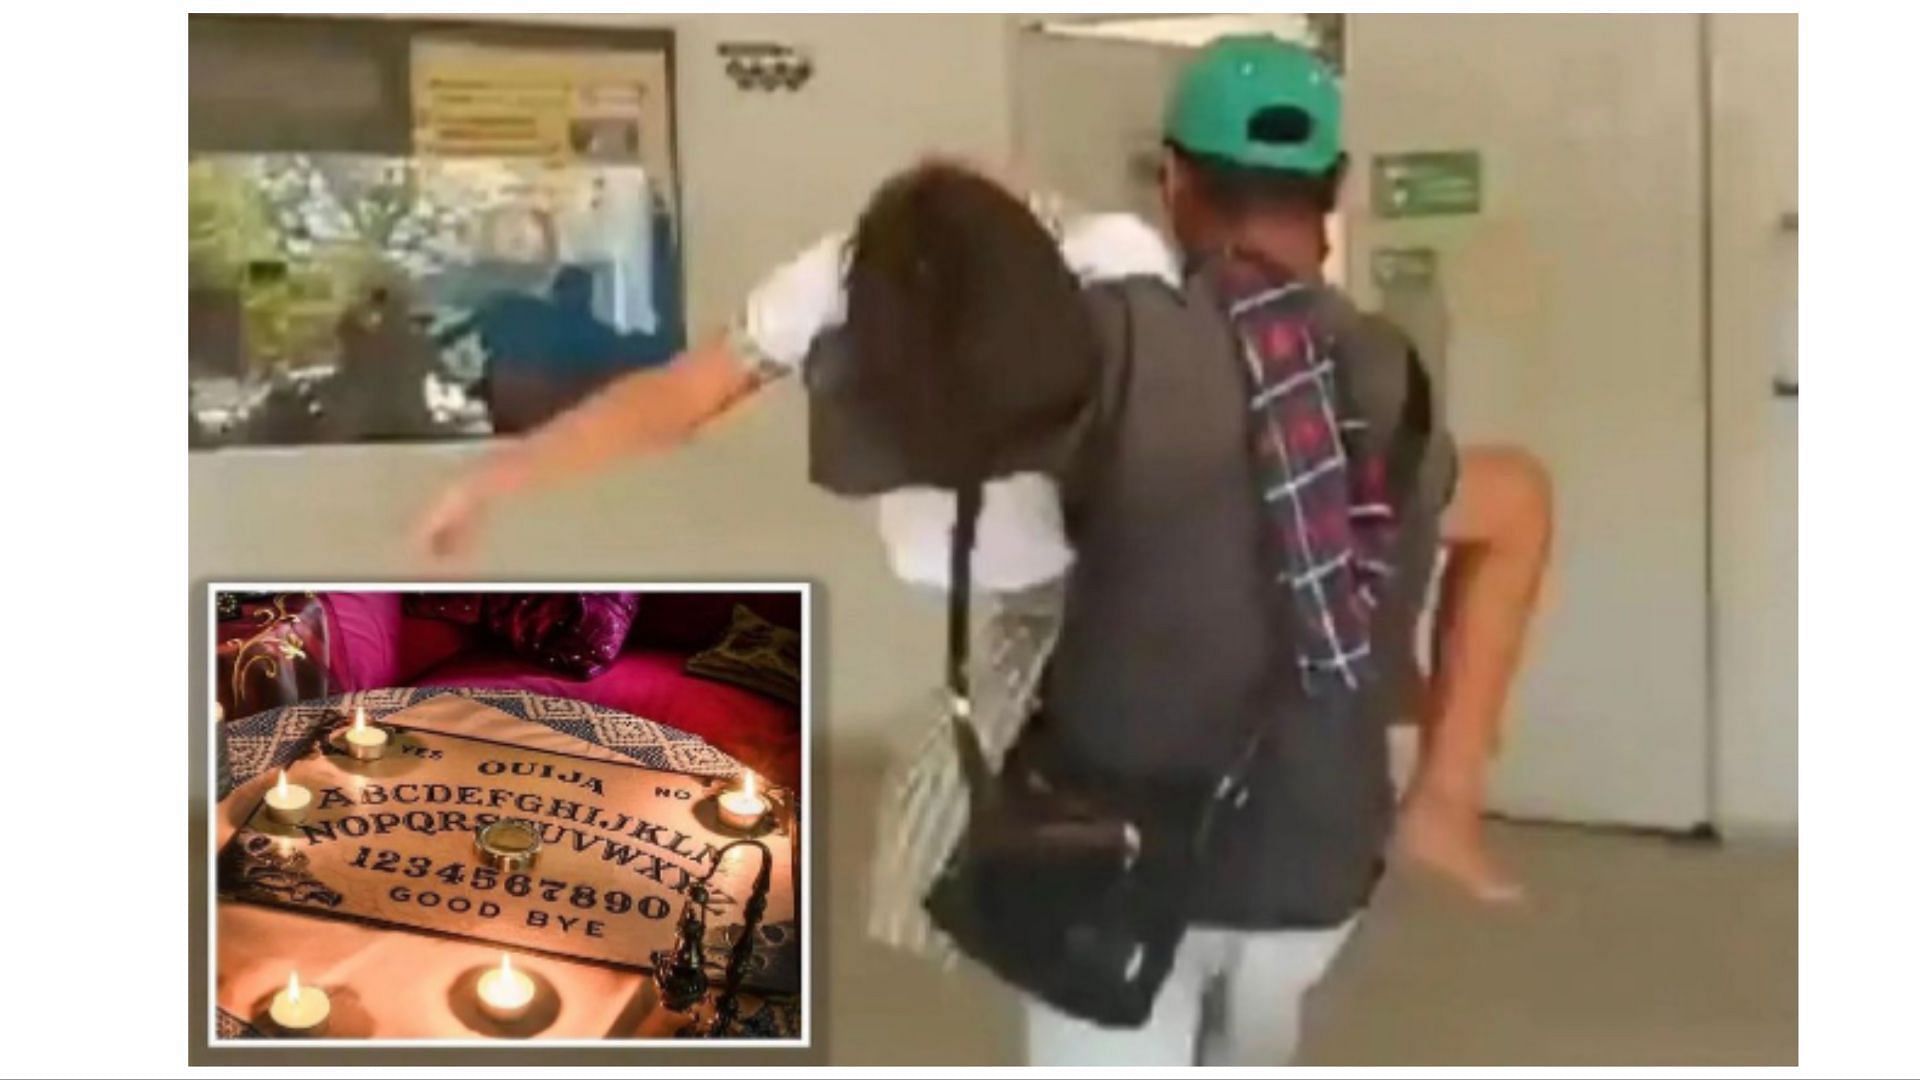 28 girls were hospitalized after playing with the Ouija board (Image via Twitter/Luminary_Wings)